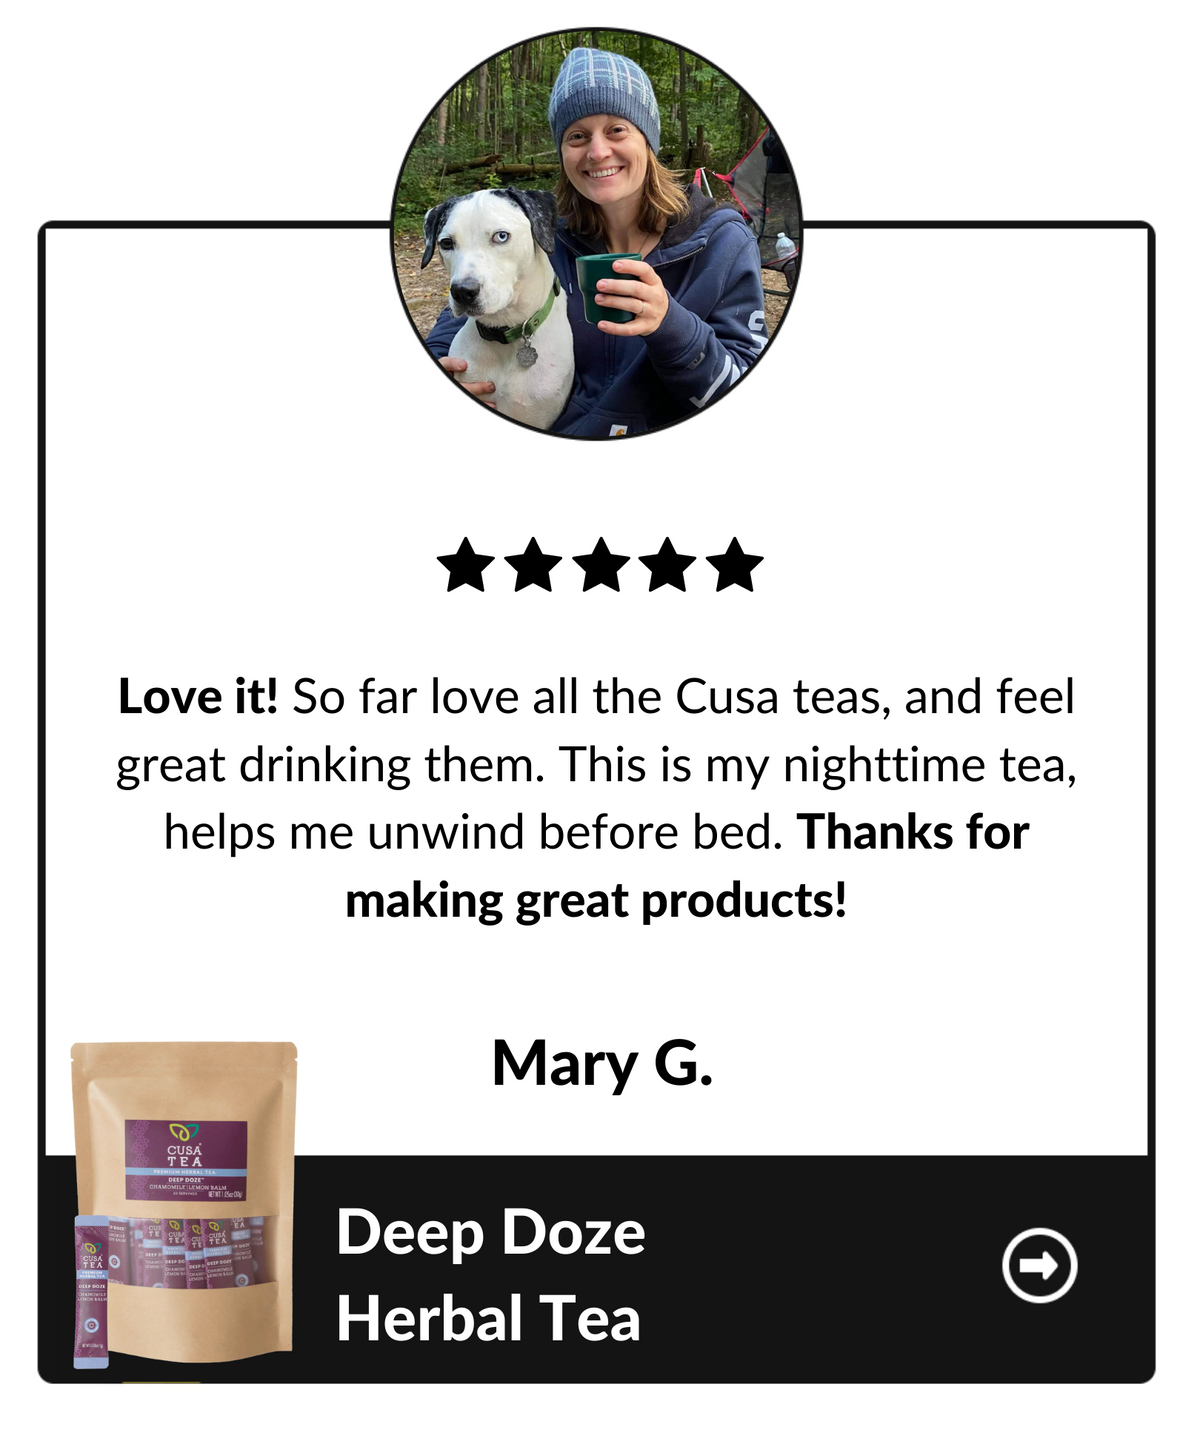 Love it! So far love all the Cusa tas, and feel great drinking them. This is my nighttime tea, helps me unwind before bed. Thanks for making great products! Mary G, Deep Doze Herbal Tea testimonial